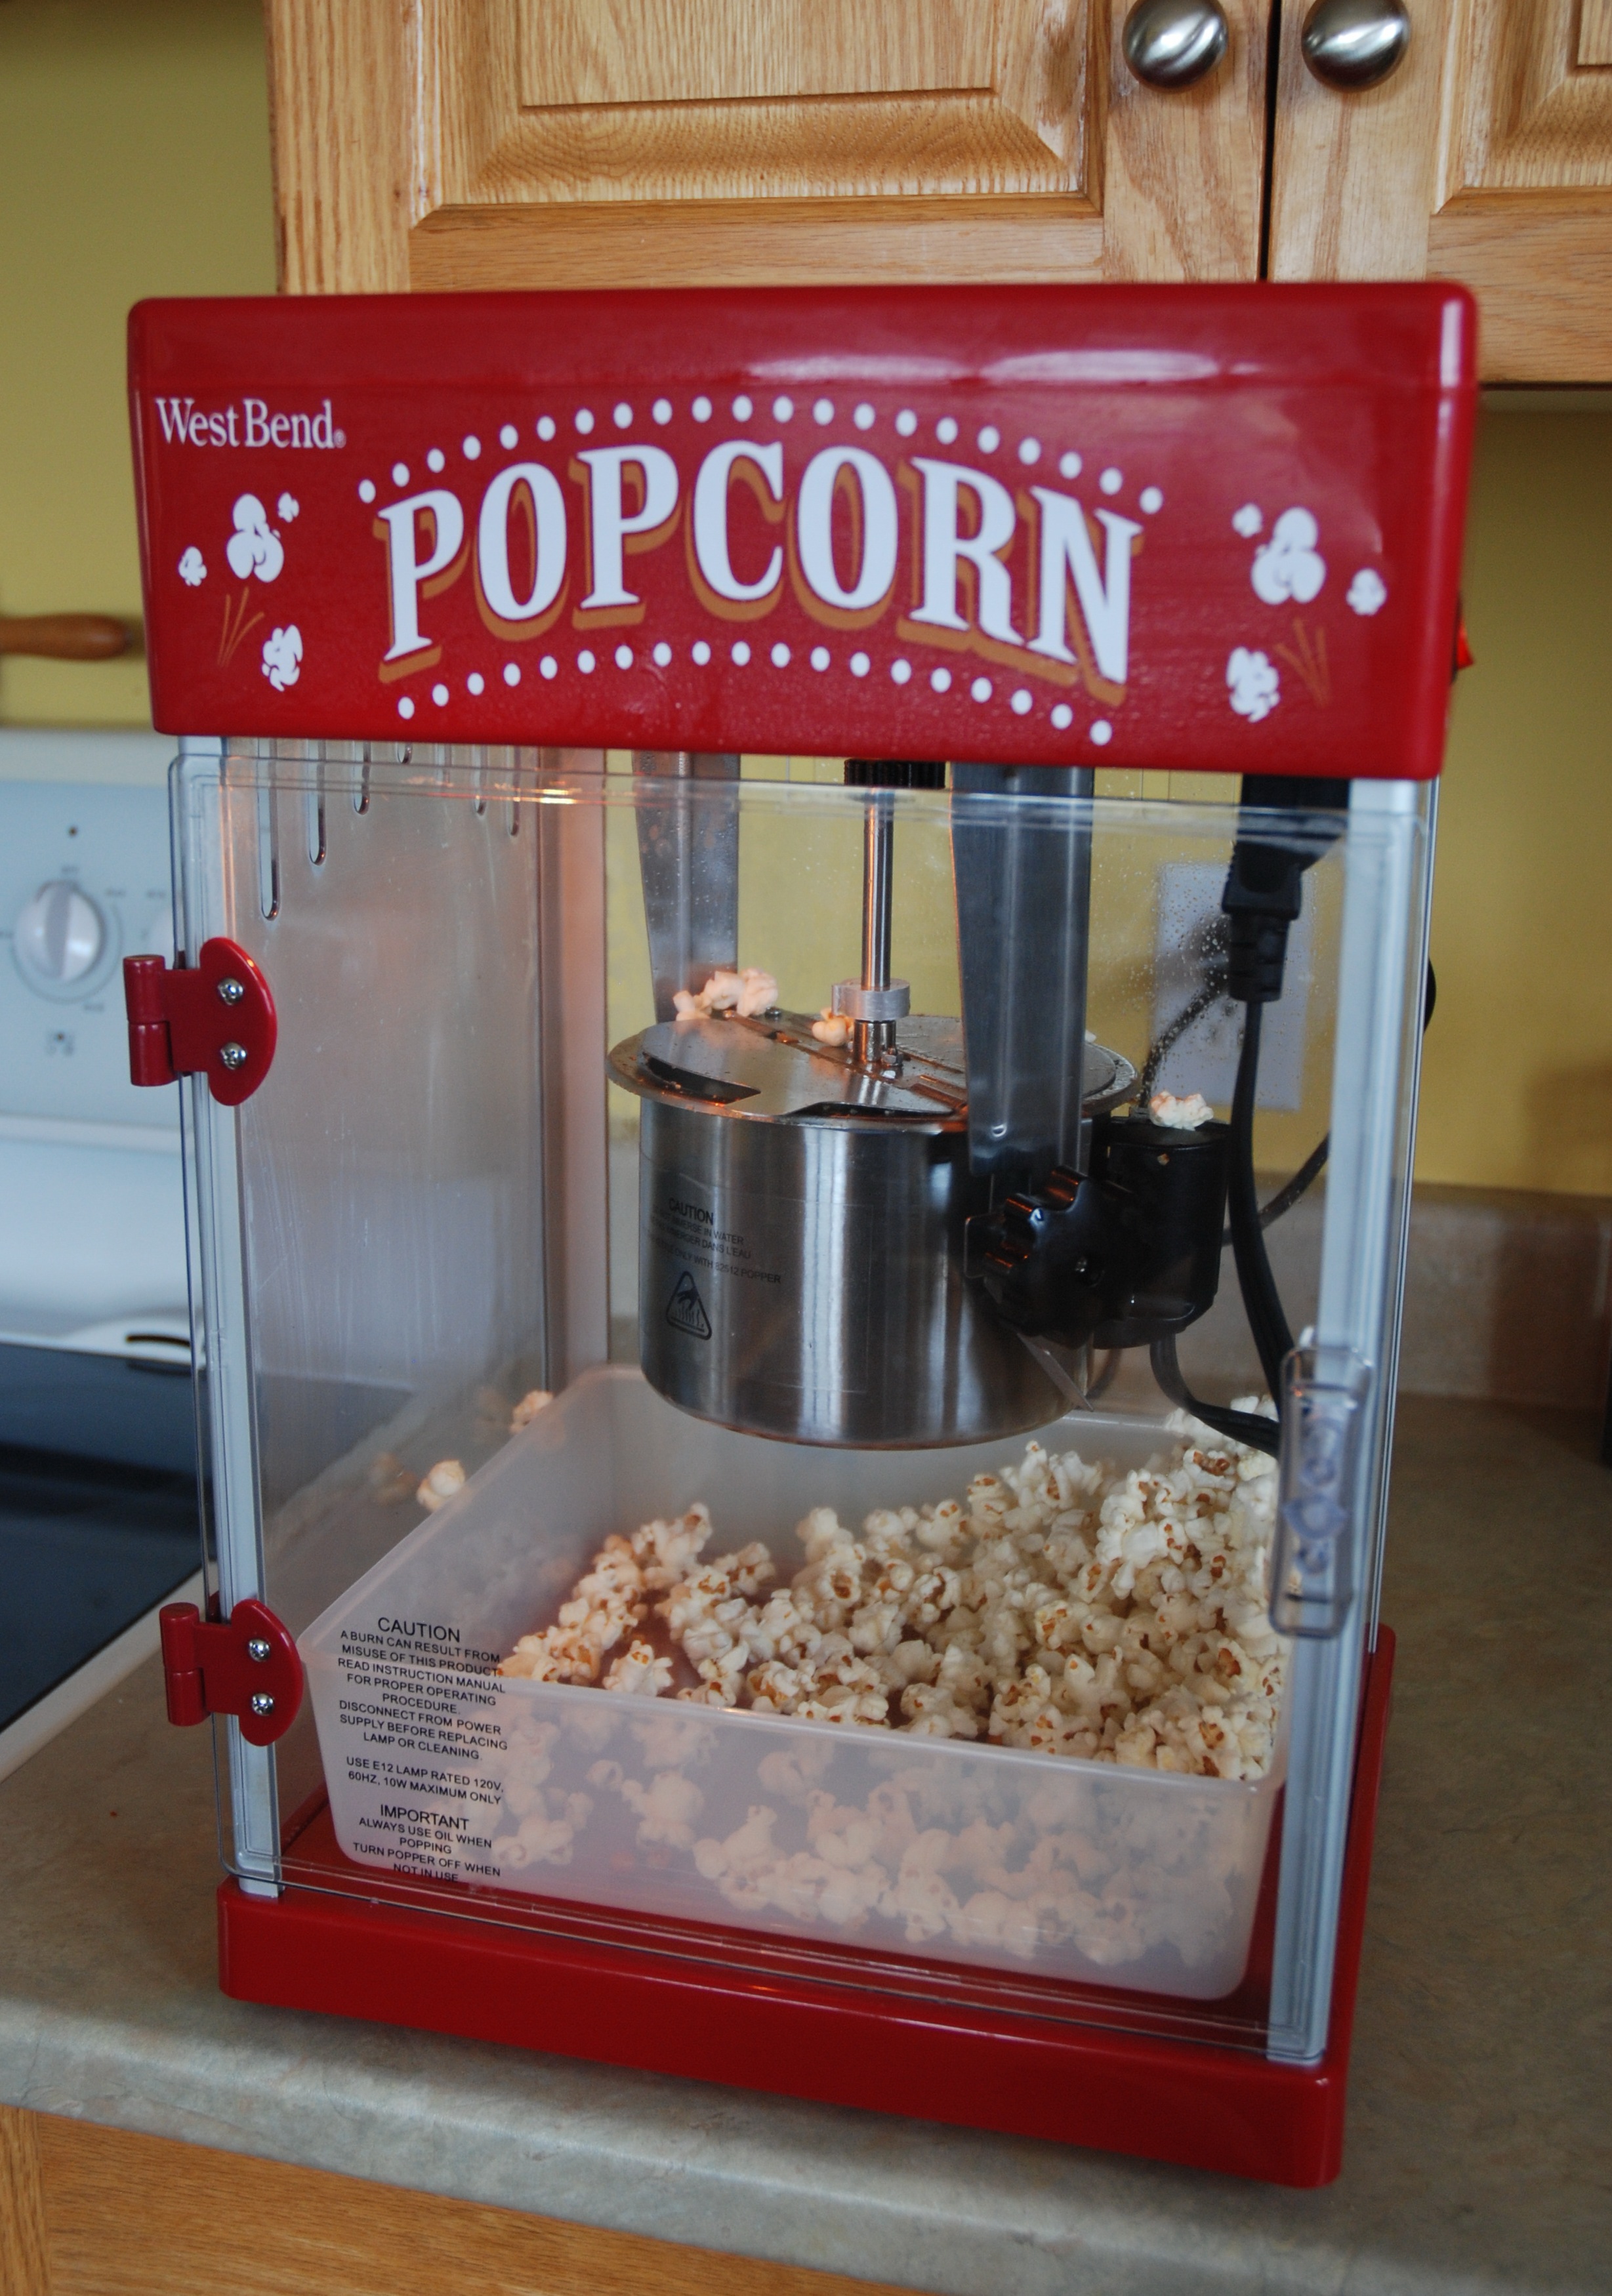 The quest to make theater popcorn at 